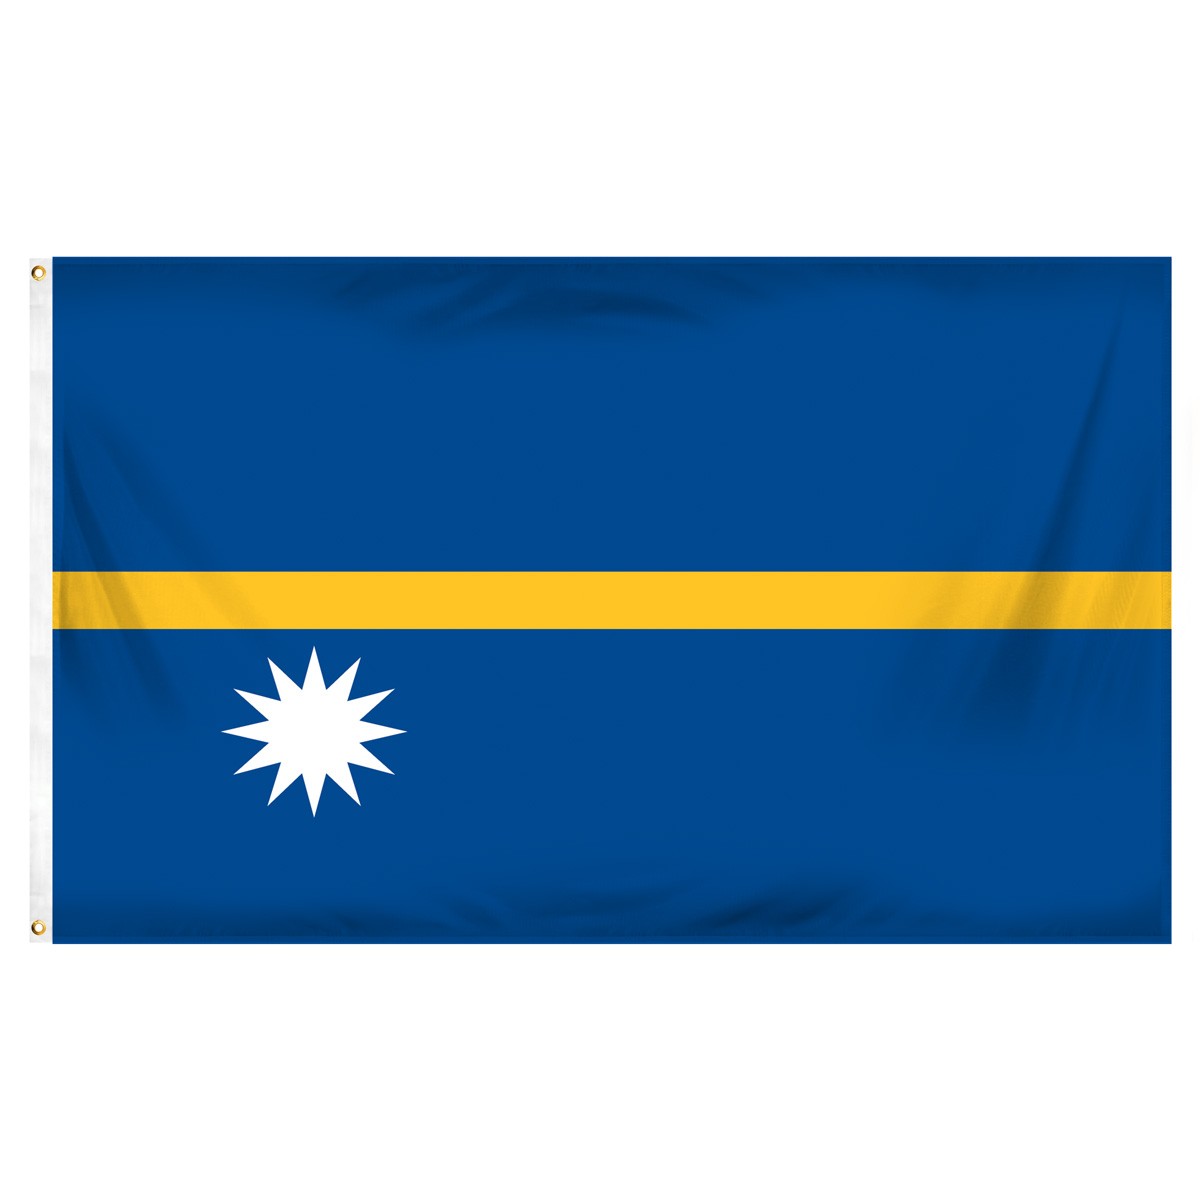 Nauru Submit Flags and Flags